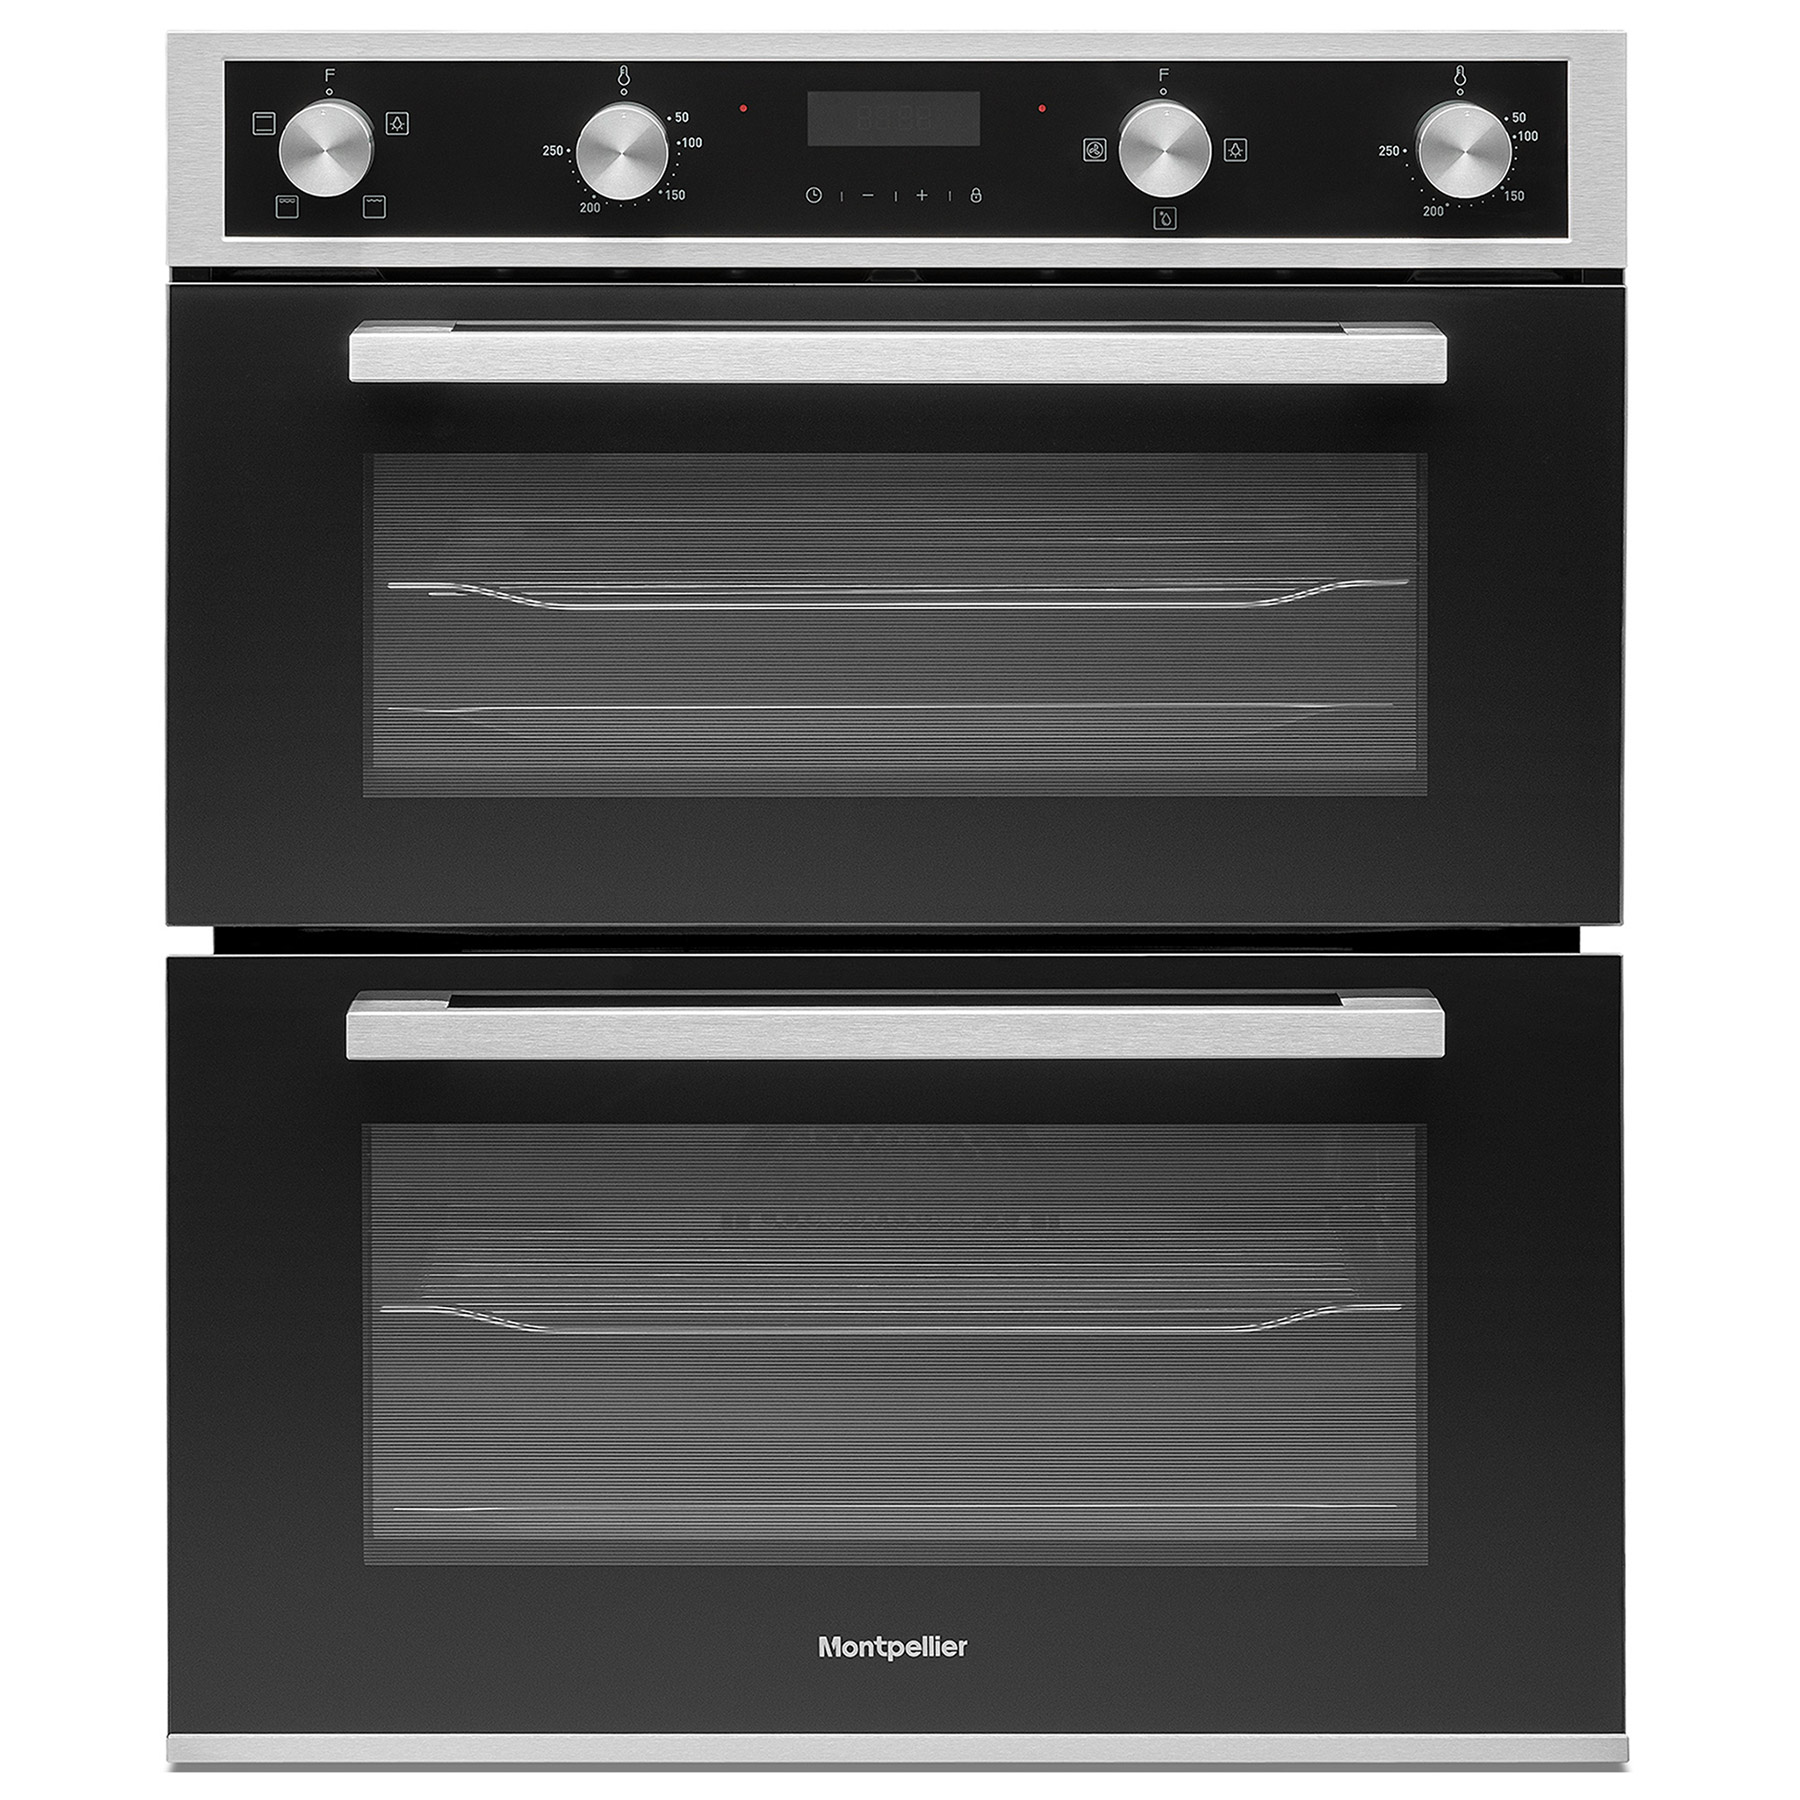 Image of Montpellier DO3550UB Built Under Electric Double Oven in Black A A Rat